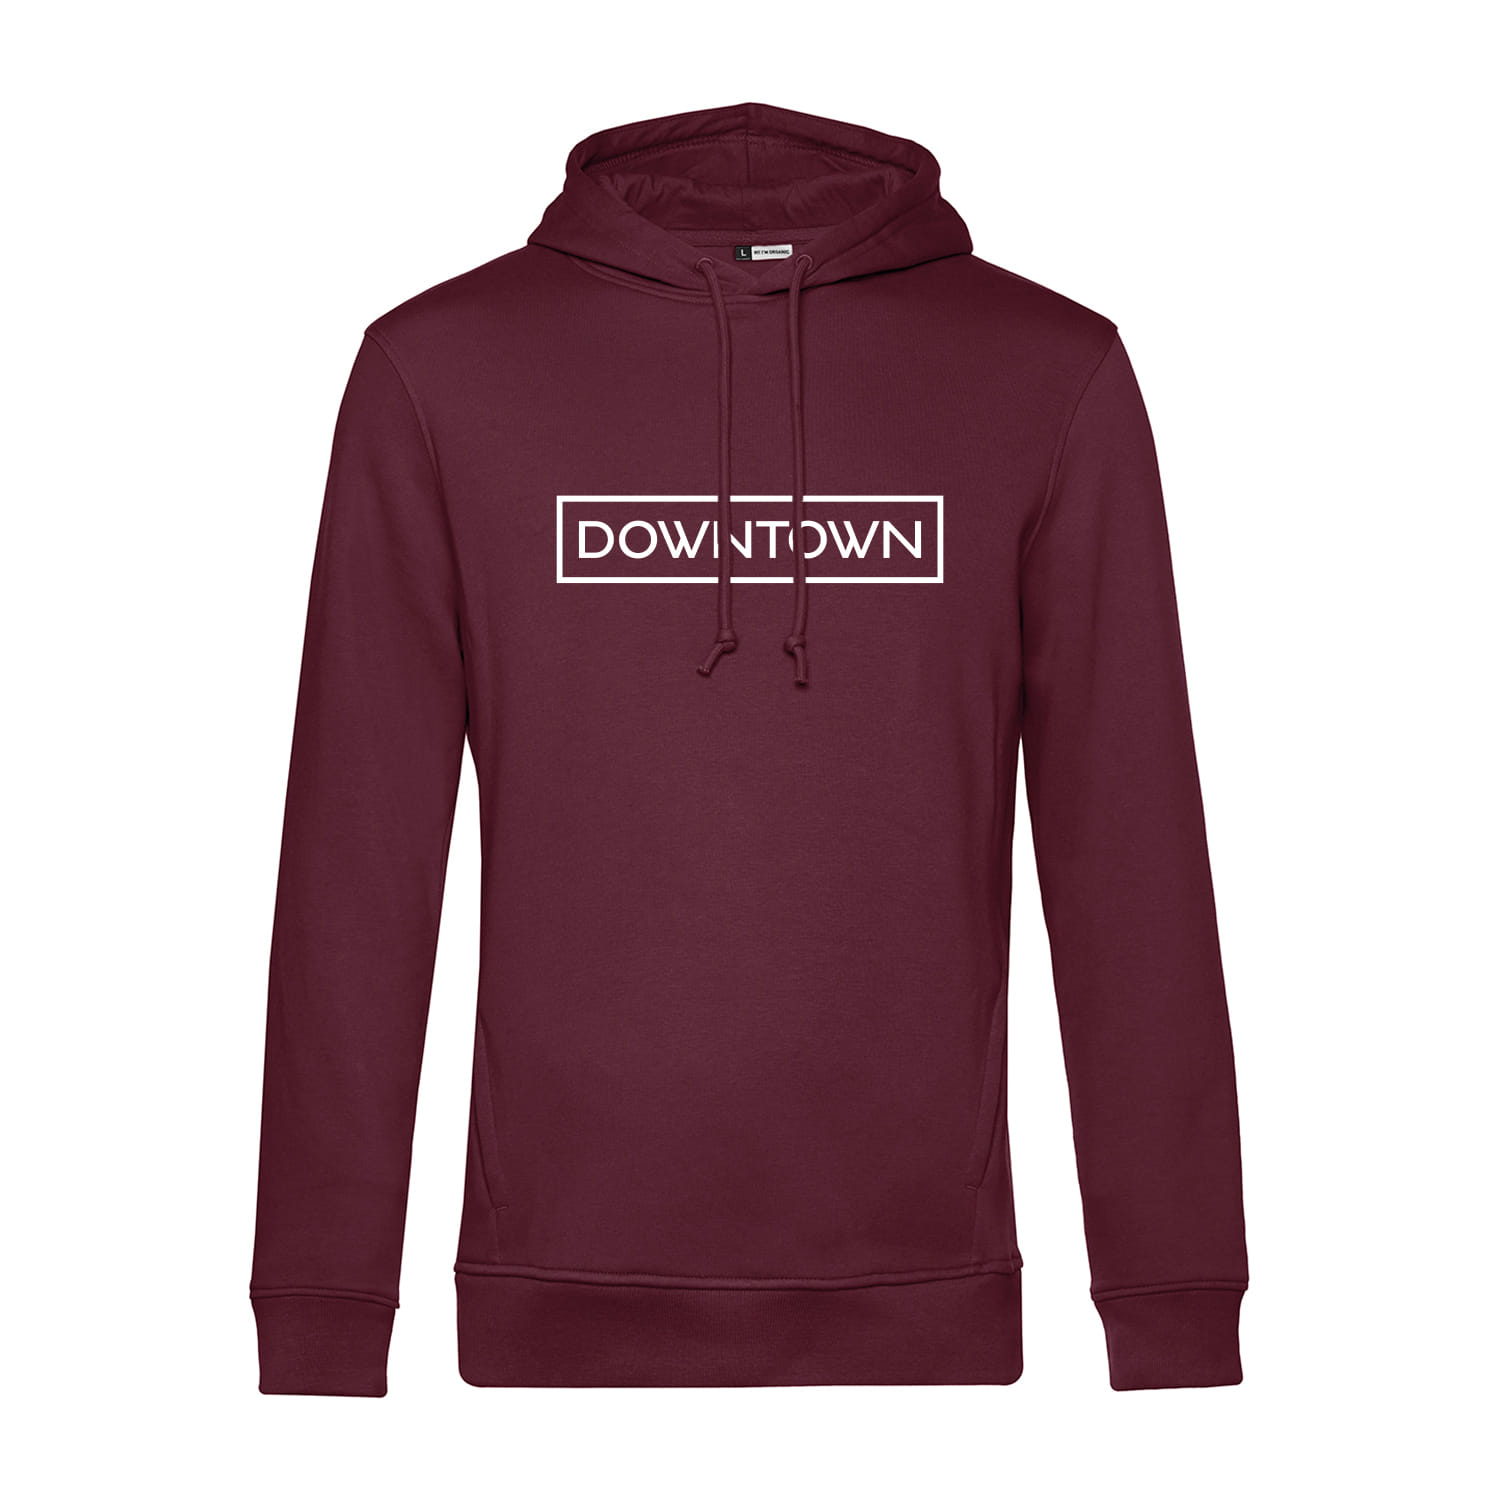 Classic Hoodie "Downtown"